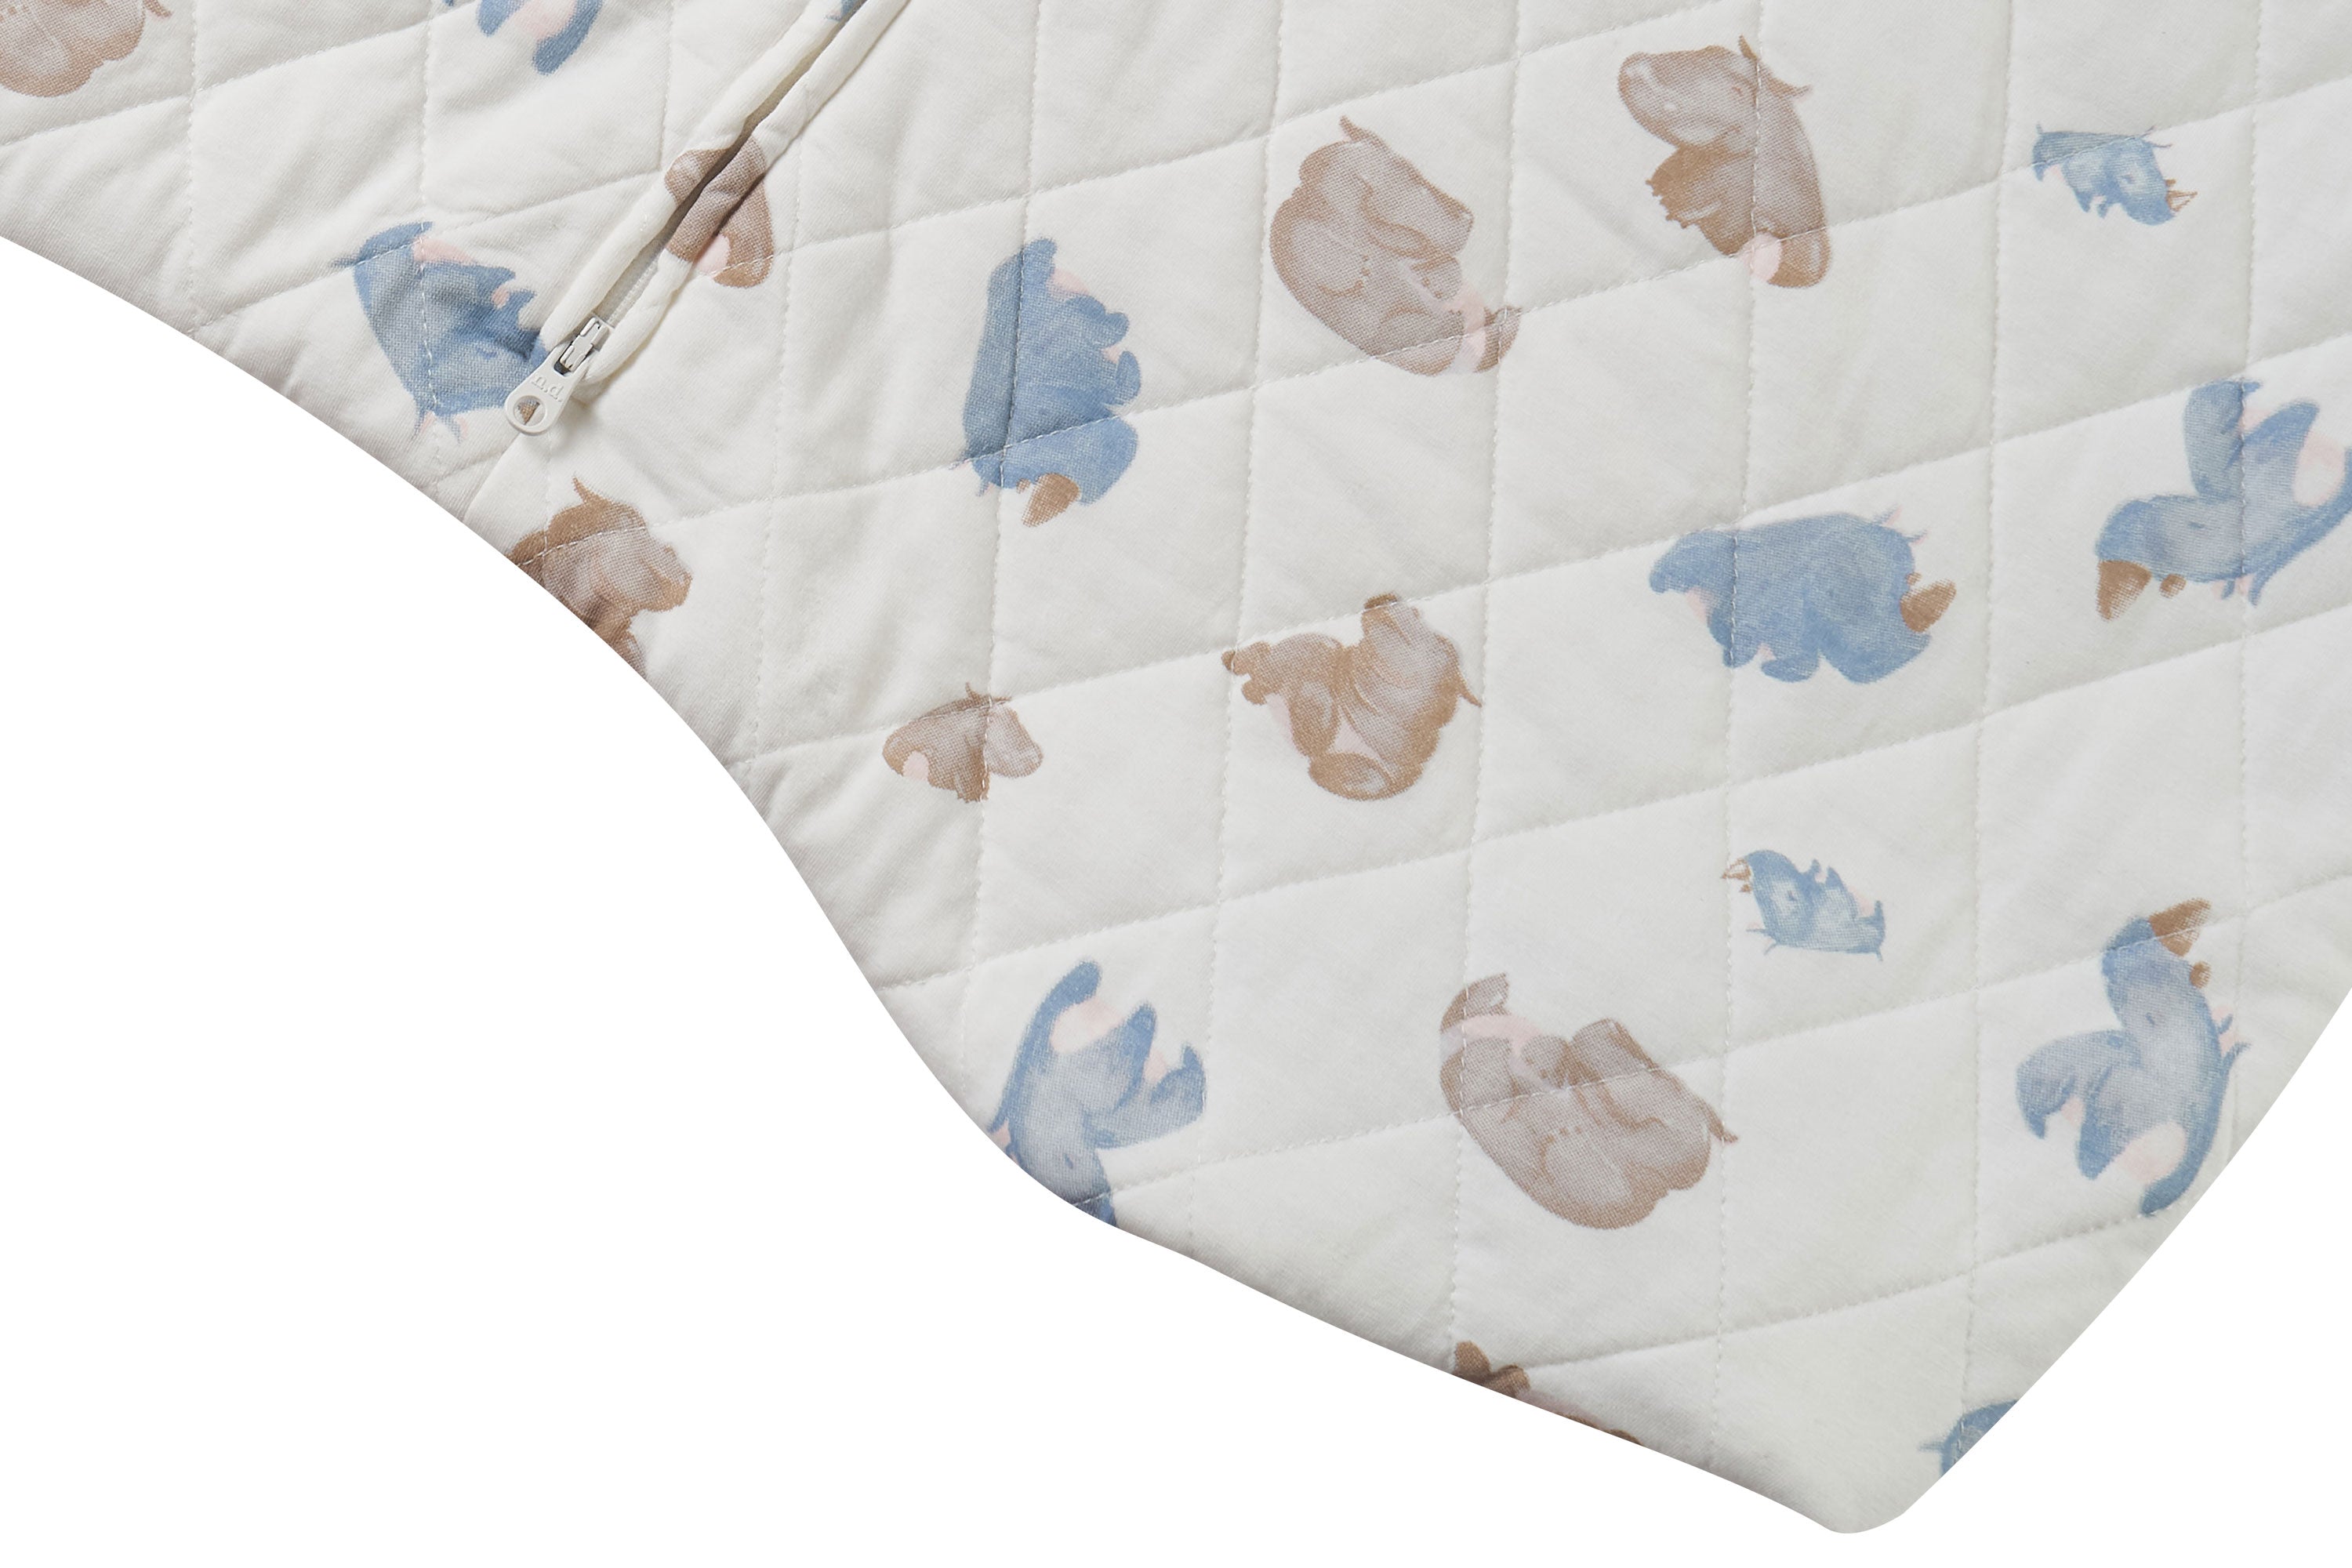 Convertible Quilted Sleep Bag 2.0 TOG (Bamboo Jersey) - Rhino Hippo